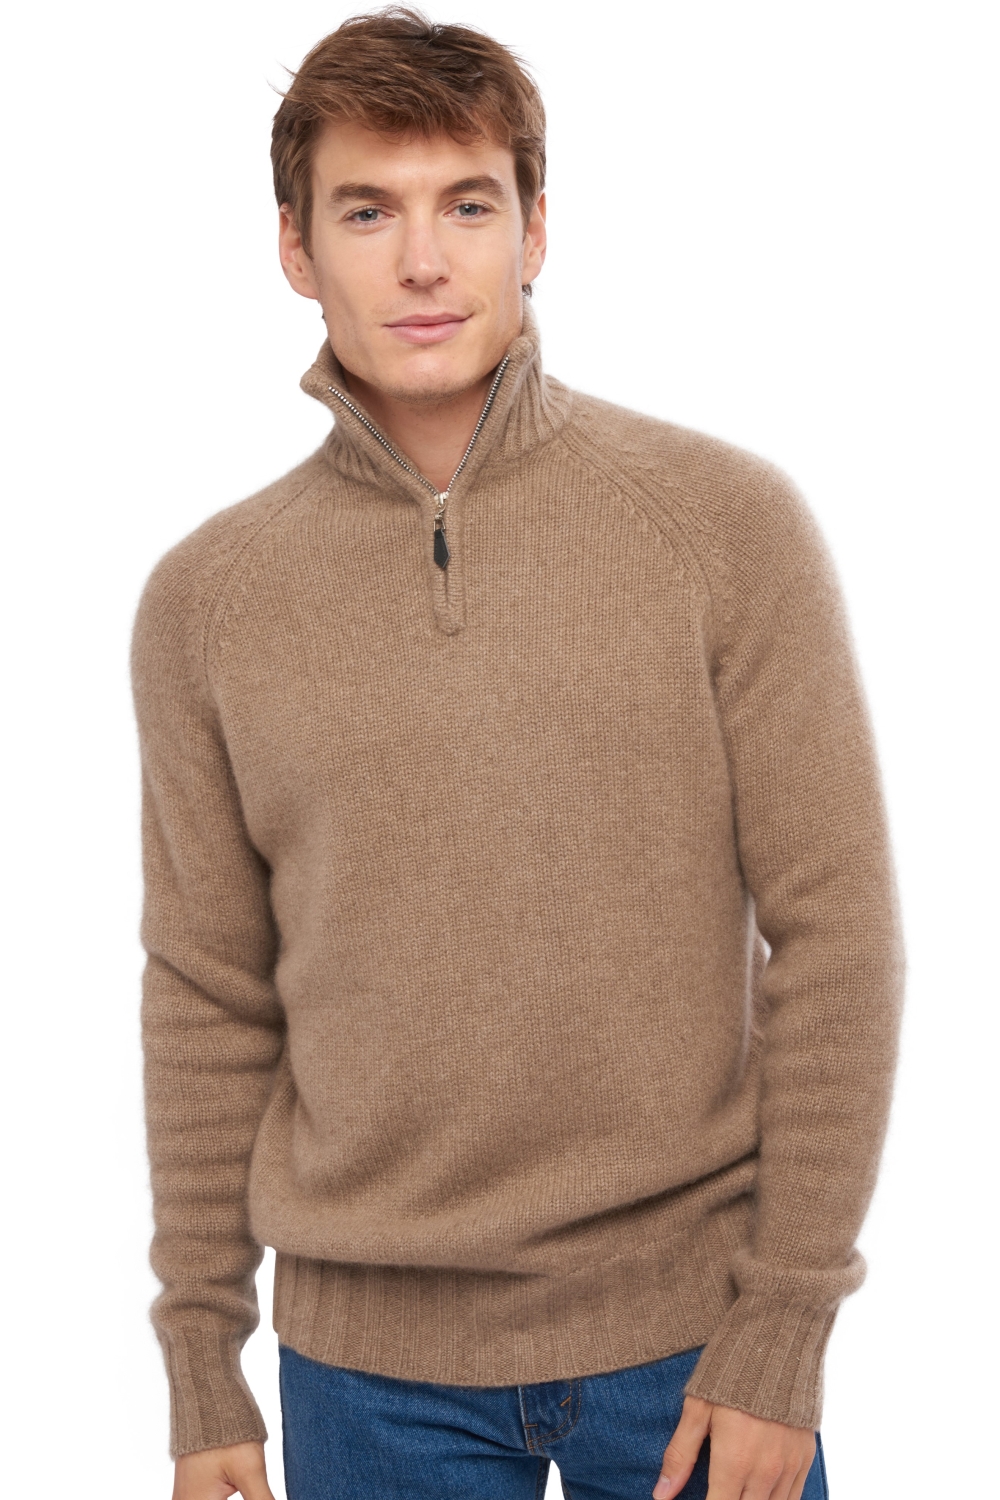  men polo style sweaters natural viero natural terra 3xl